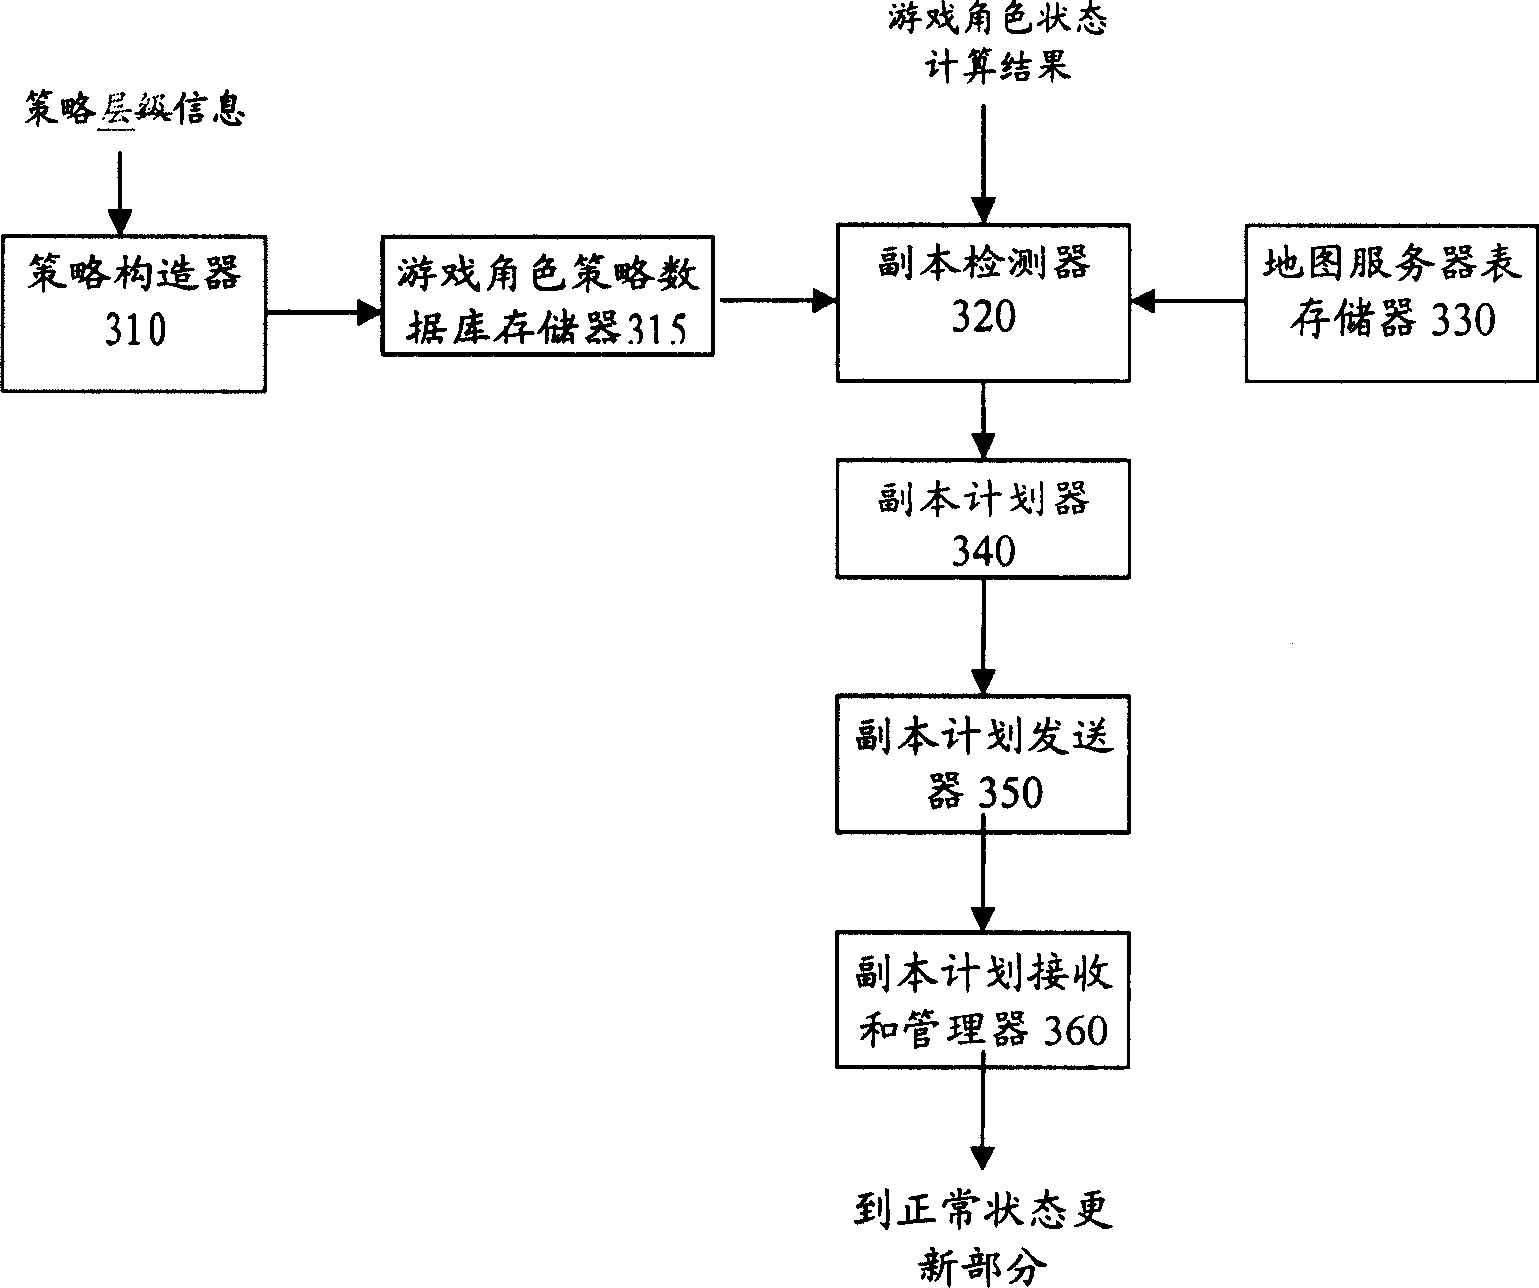 Slitless game world system based on server/customer's machine and method thereof